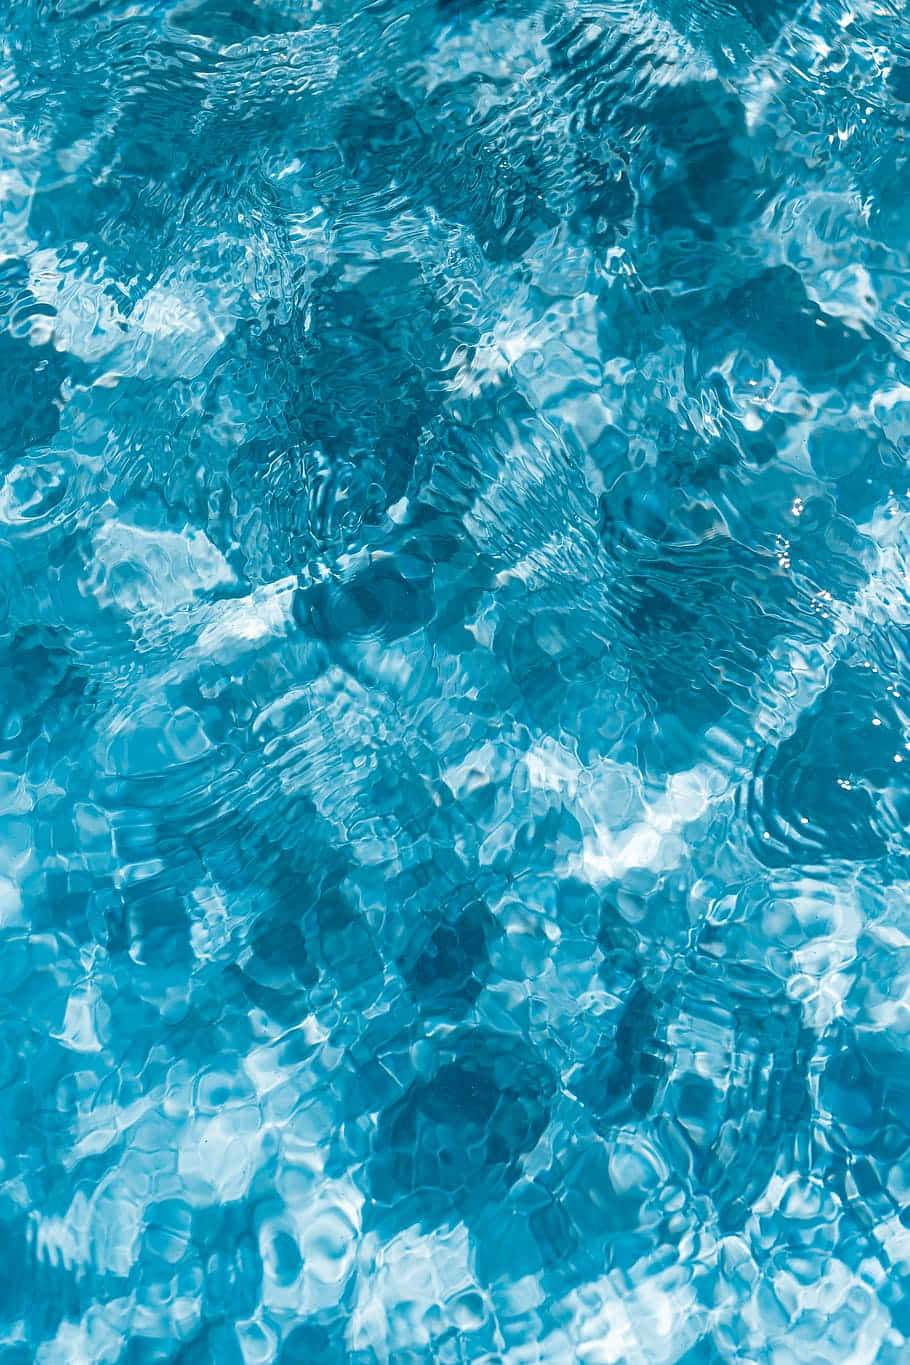 Take a dip in this crystal clear swimming pool and enjoy the summer.